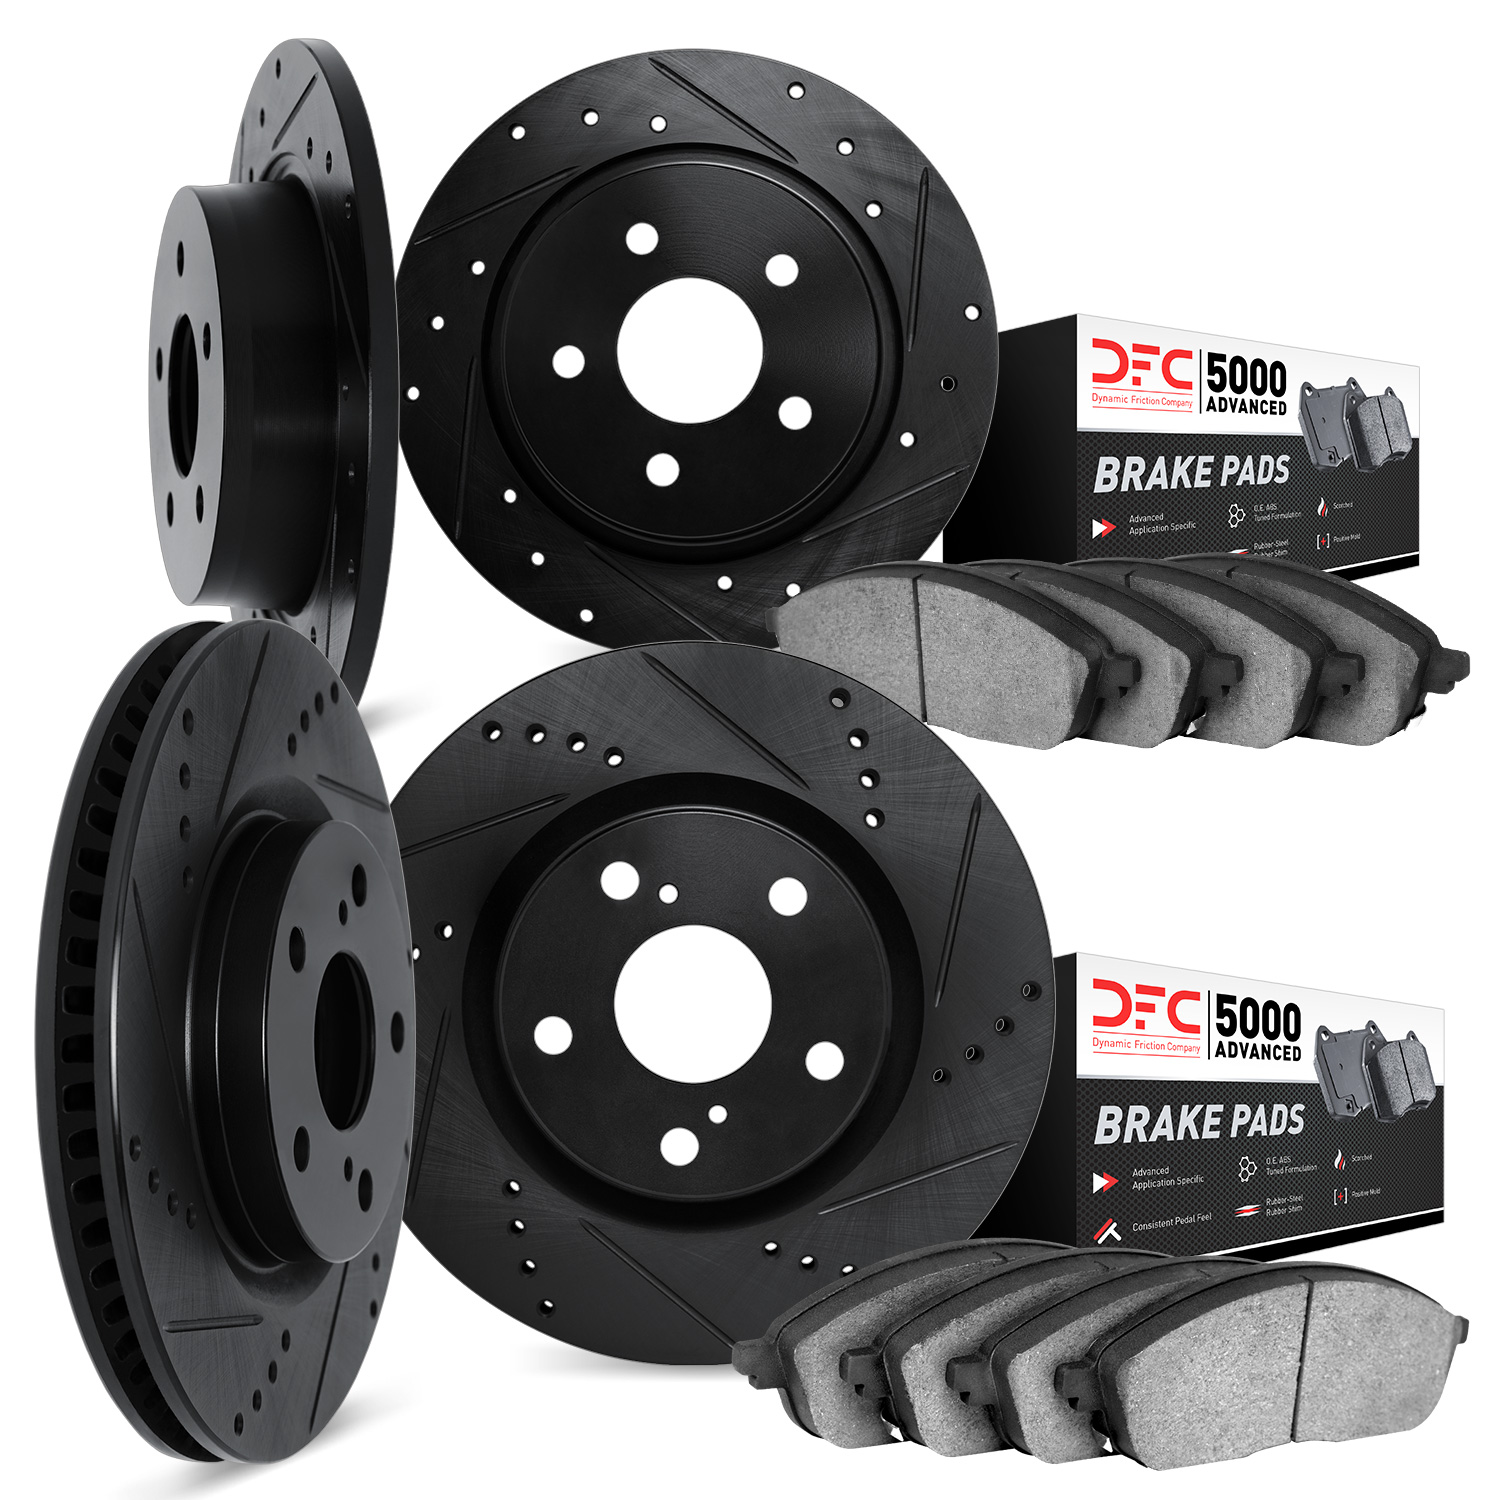 8504-74059 Drilled/Slotted Brake Rotors w/5000 Advanced Brake Pads Kit [Black], 1999-2006 Audi/Volkswagen, Position: Front and R